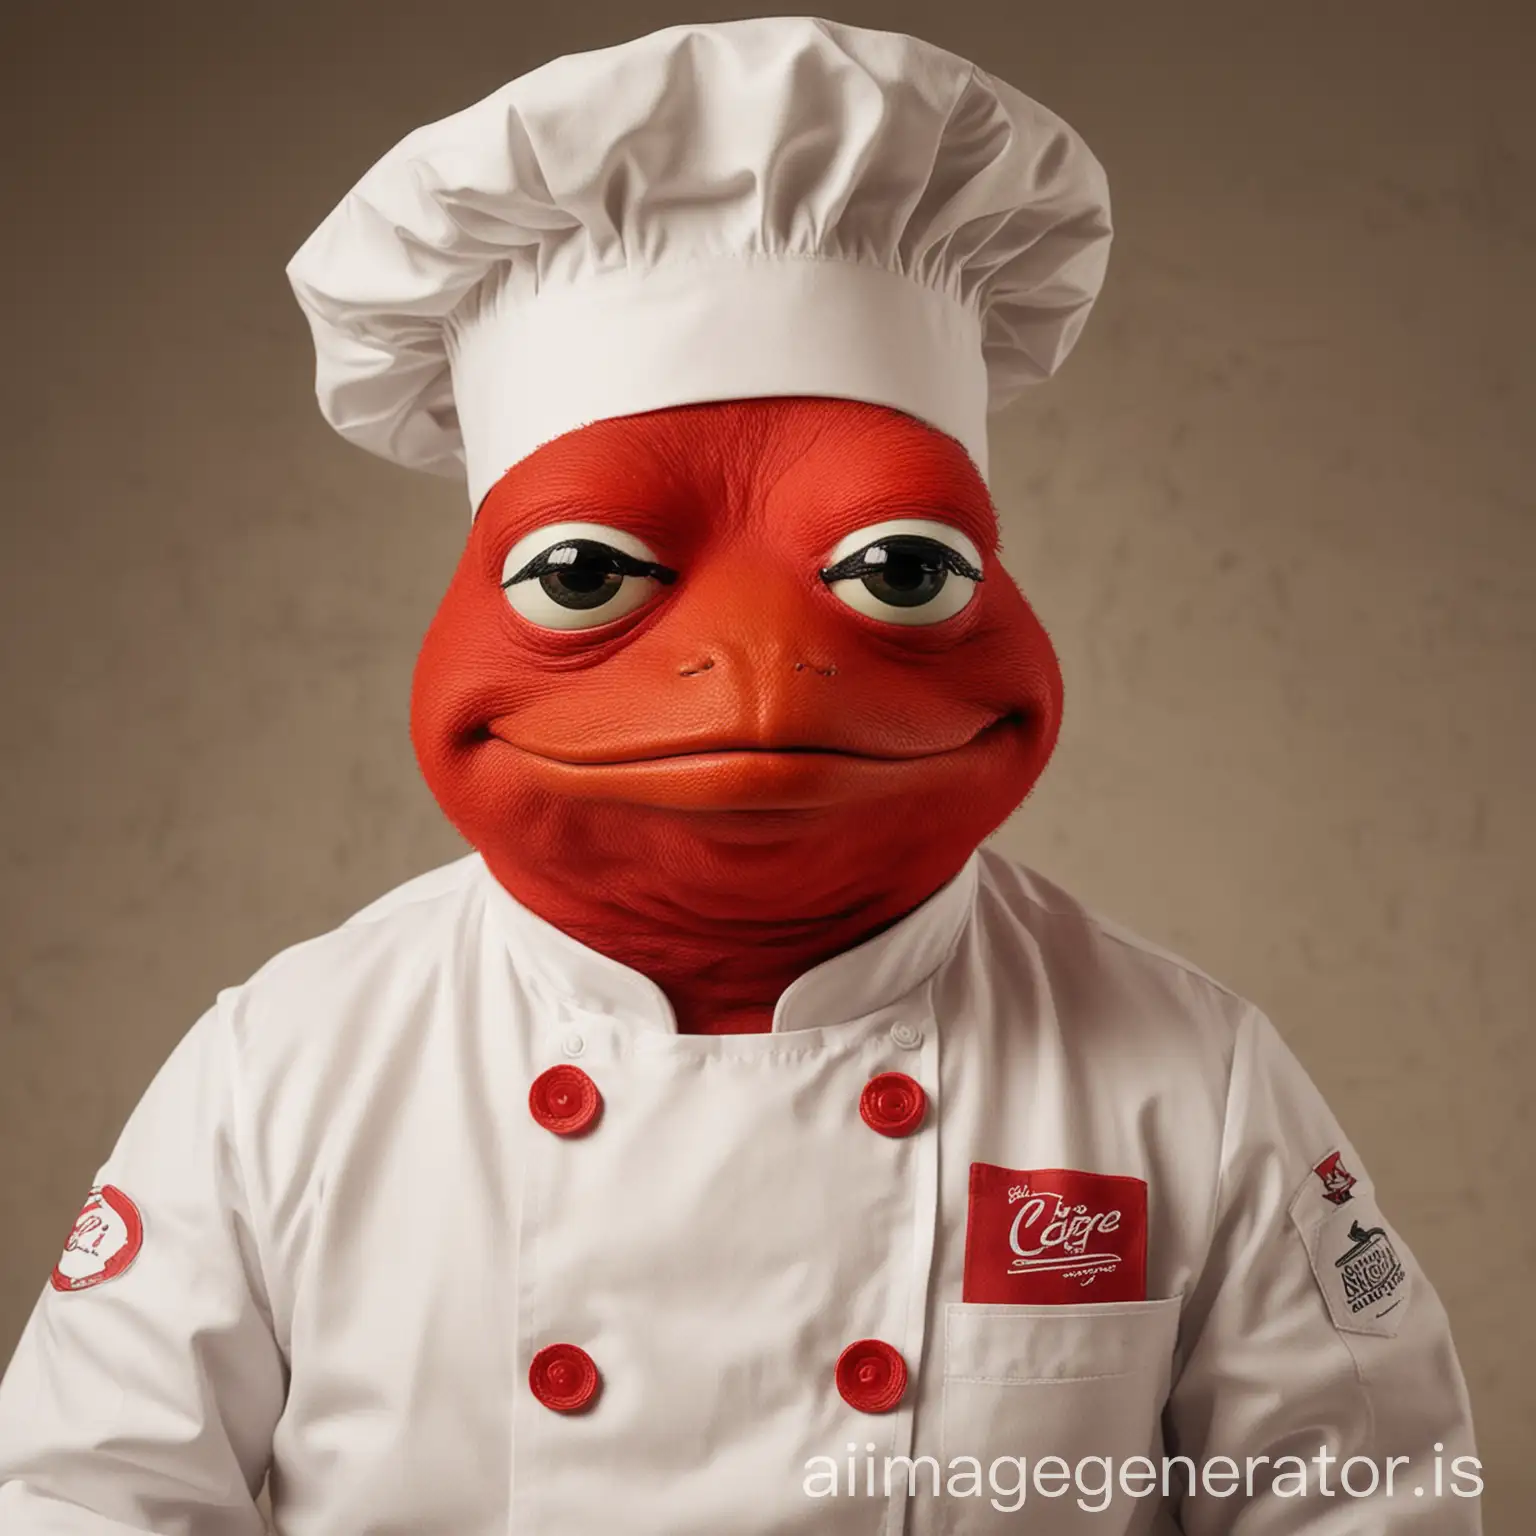 The color is red PEPE, wearing chef uniforms